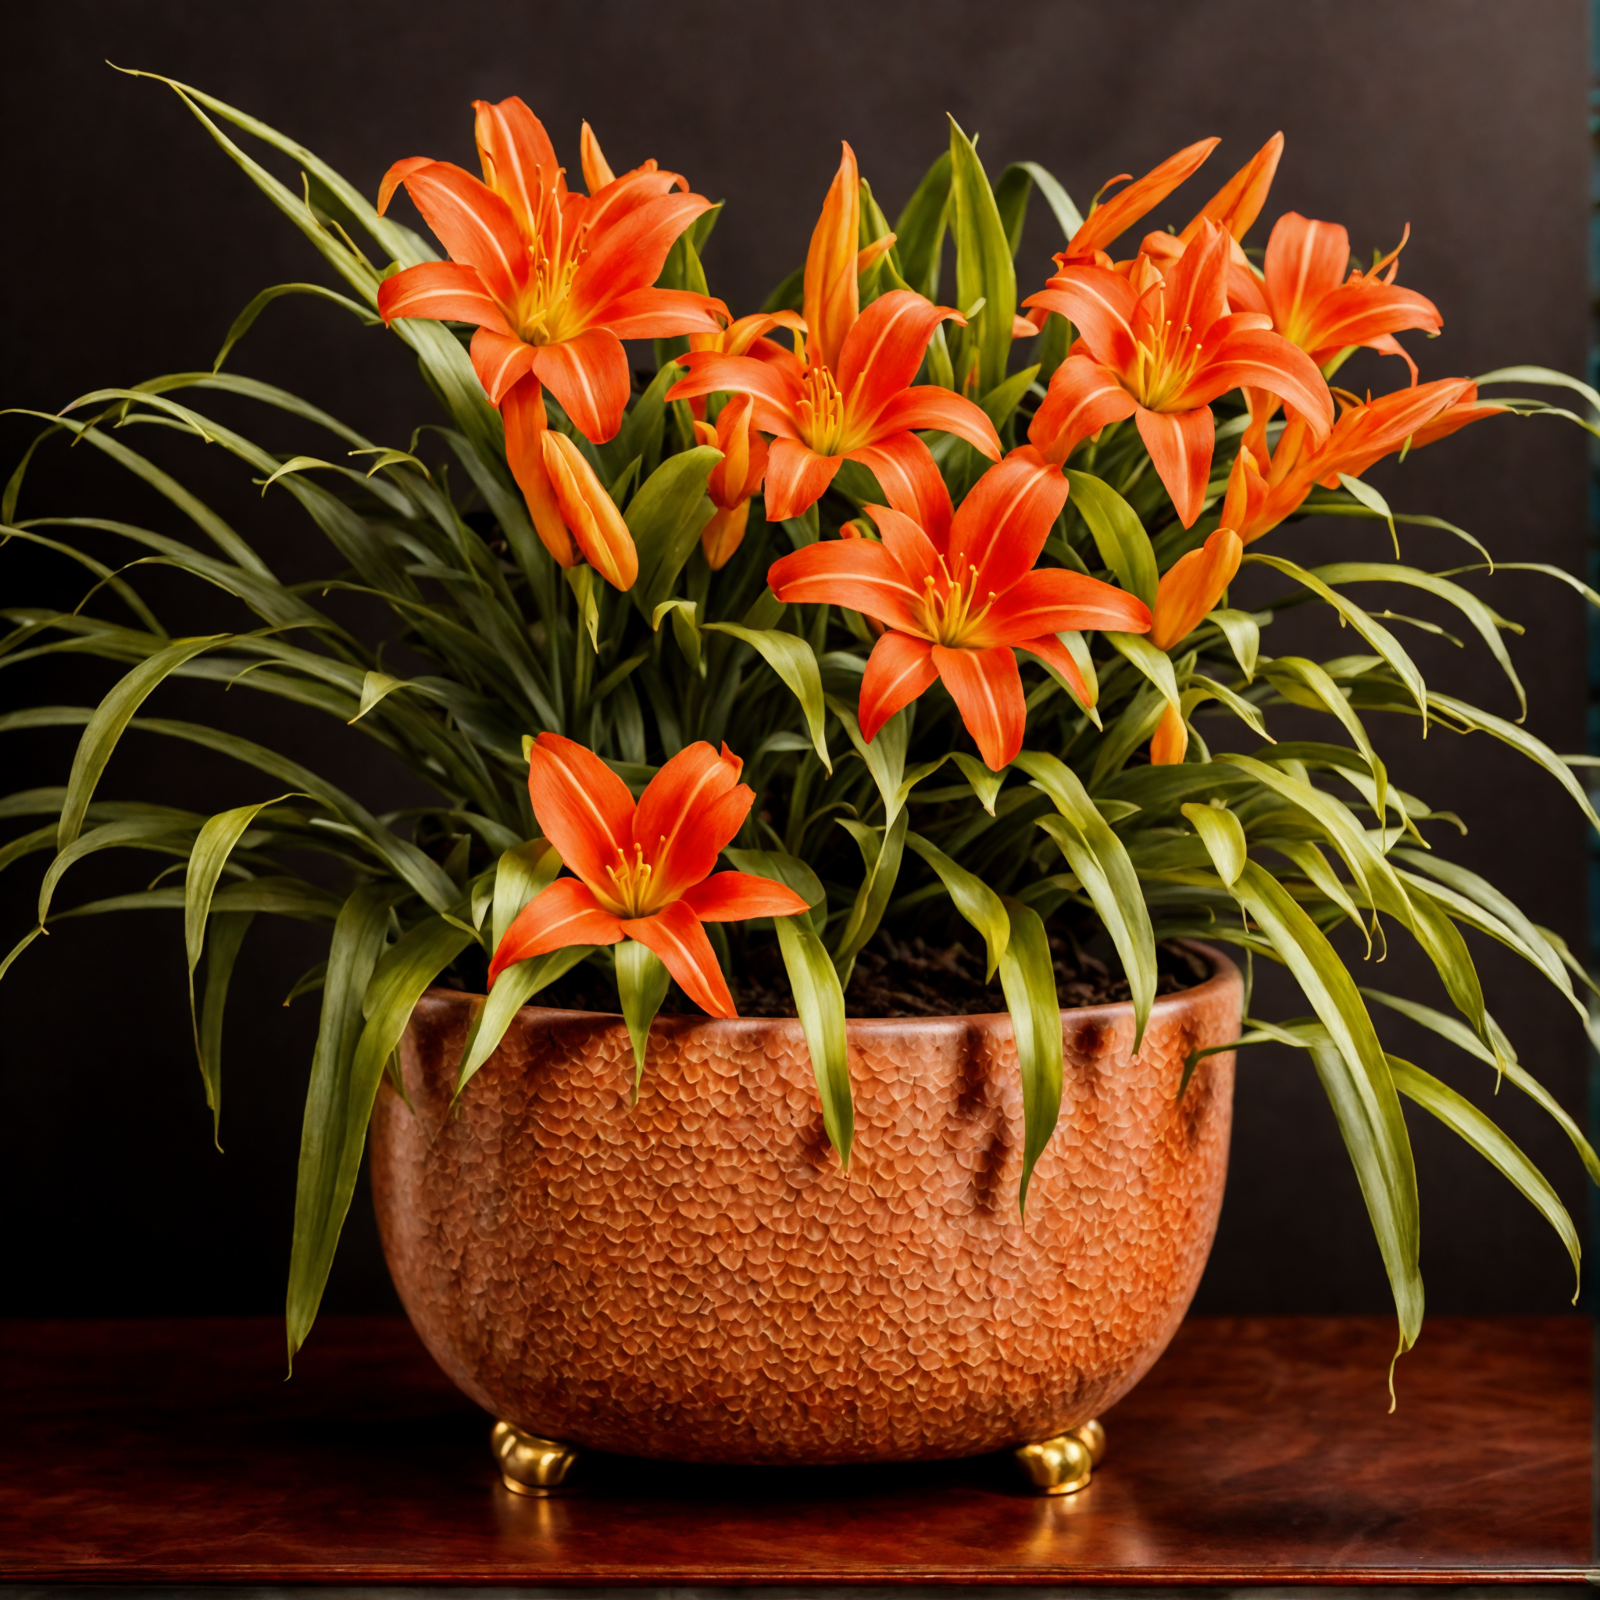 Hemerocallis fulva, or orange daylilies, in a brown vase on a wooden table, with clear, neutral lighting.